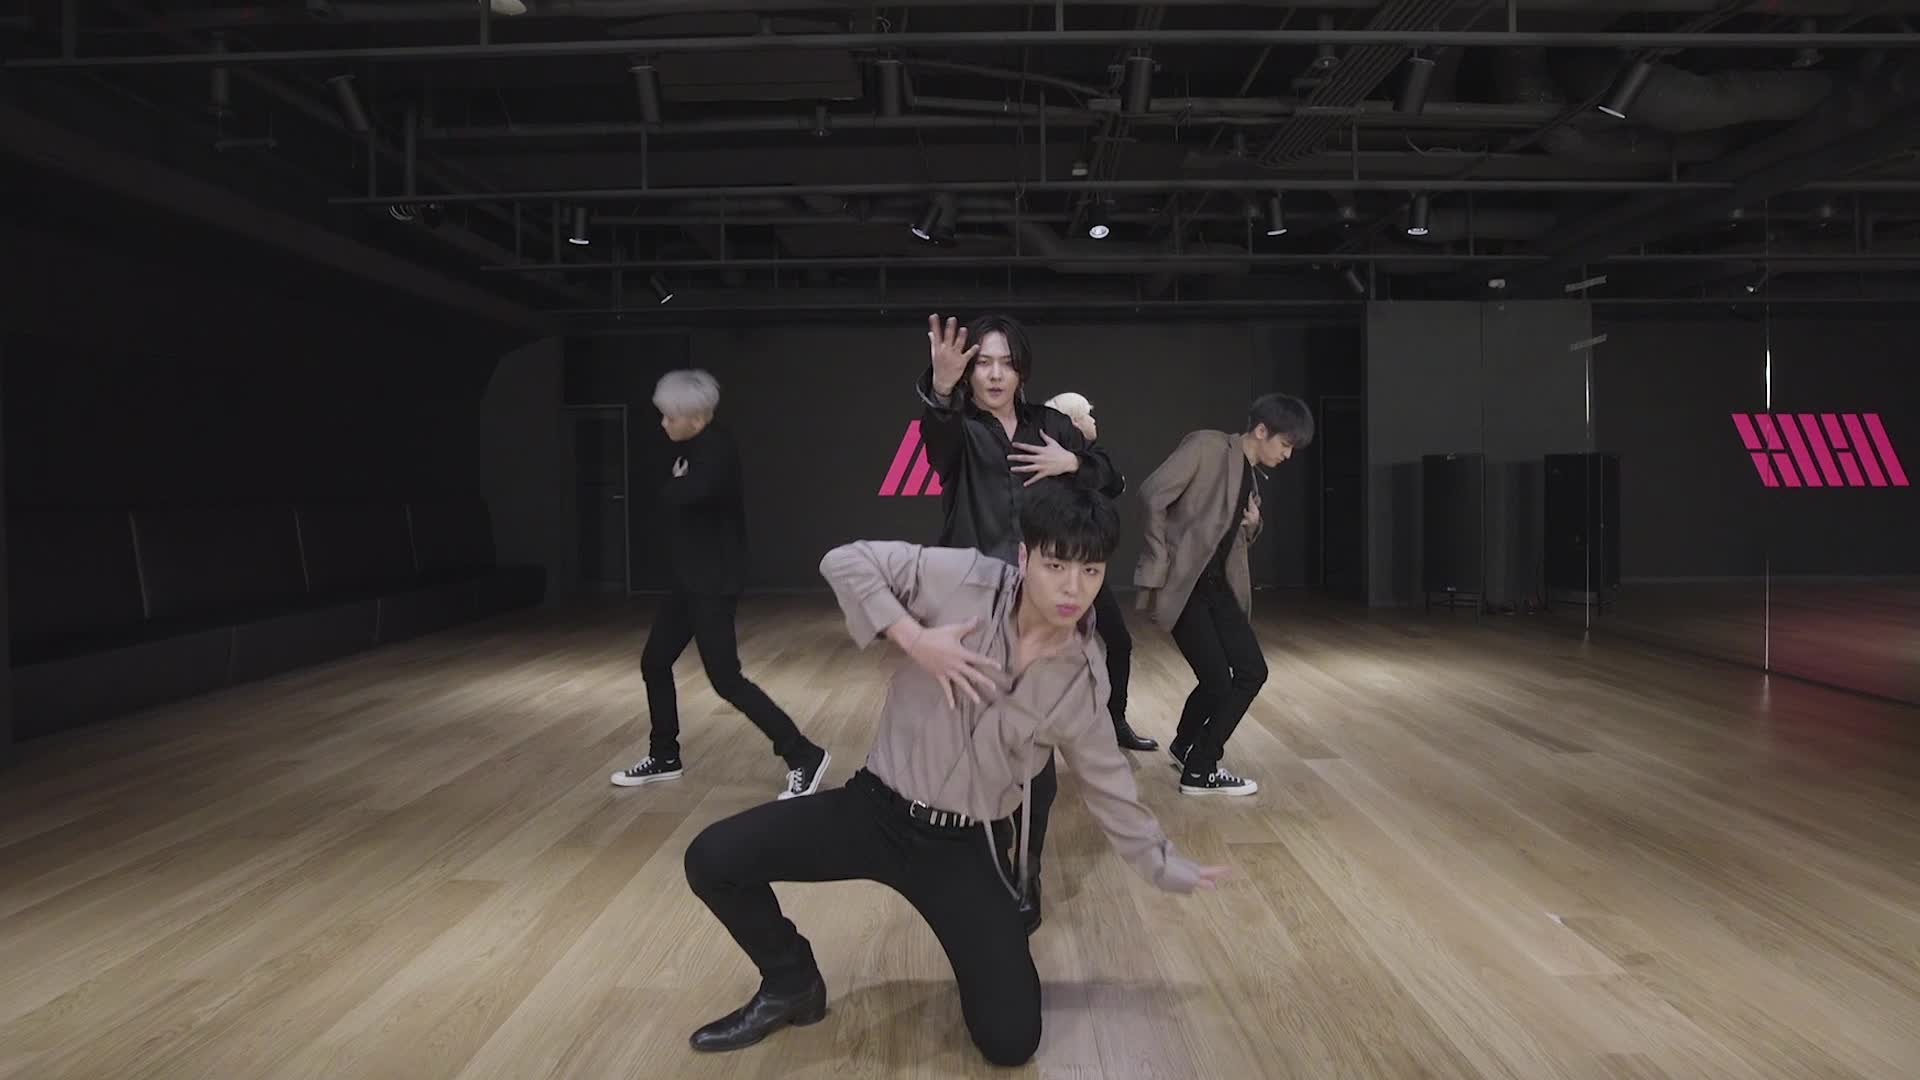 iKON - ‘왜왜왜 (Why Why Why)’ DANCE PRACTICE VIDEO